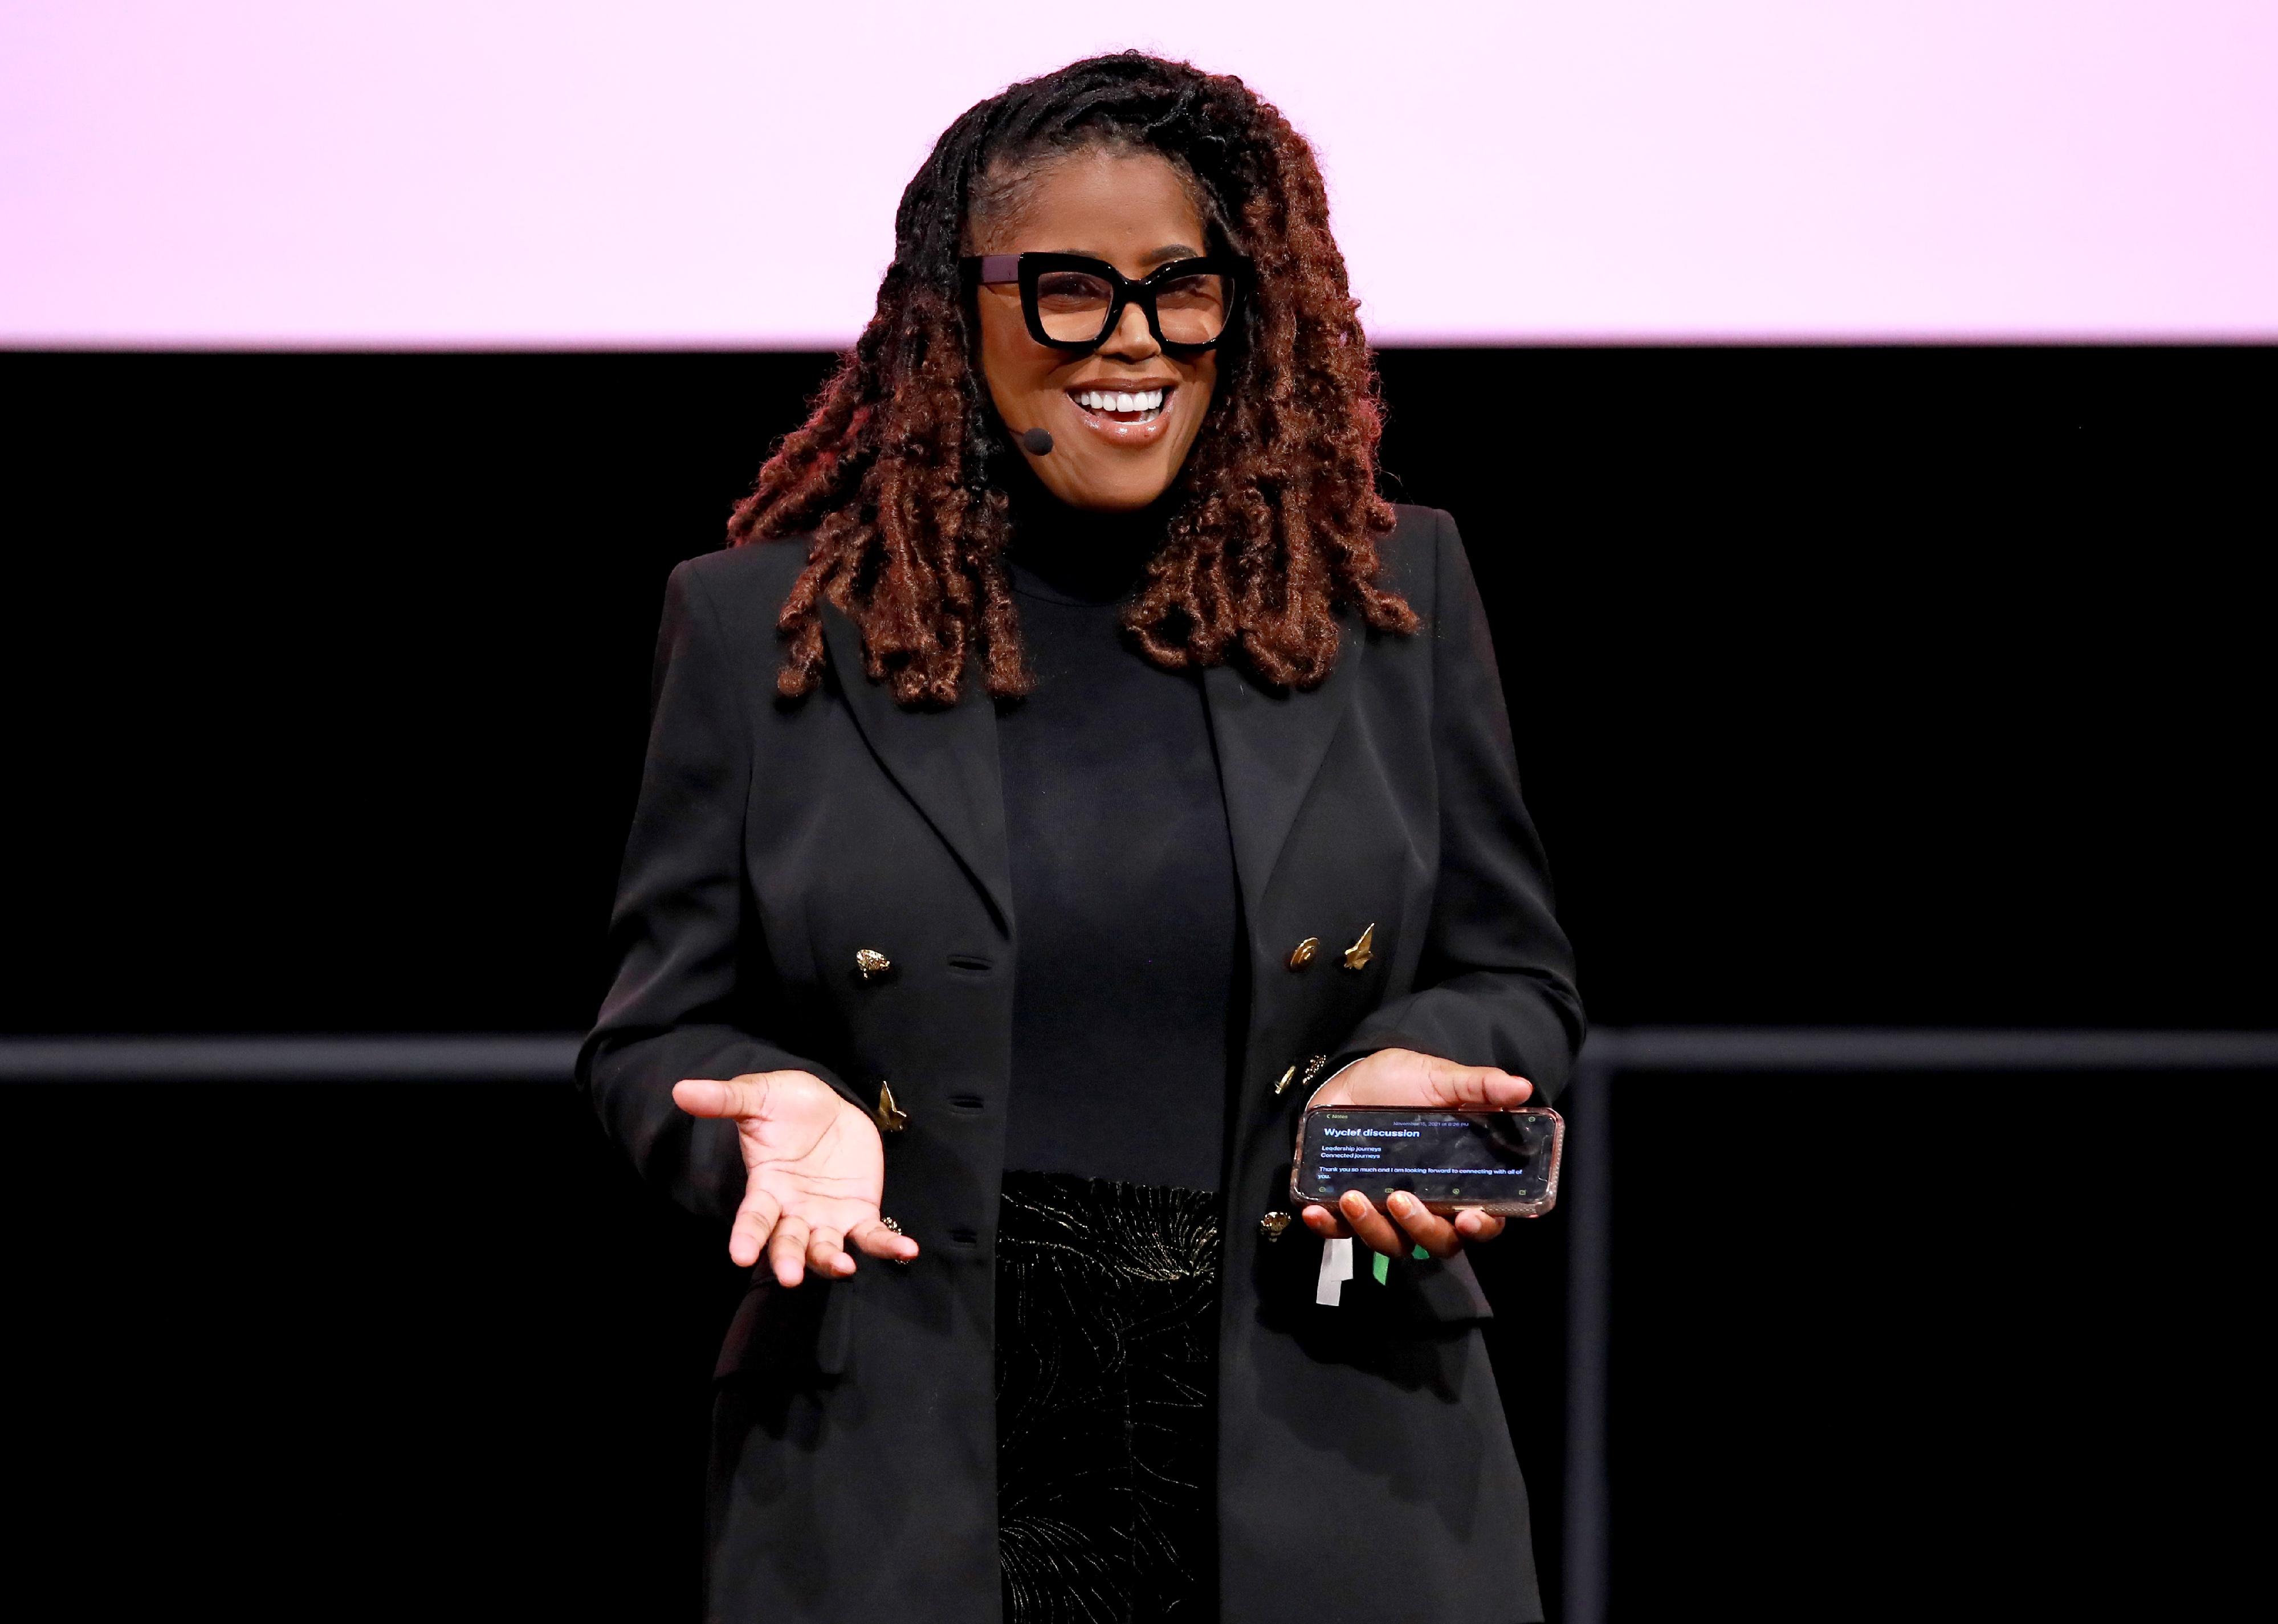 Thasunda Duckett, wearing all black, speaking onstage against a black and pink backdrop.